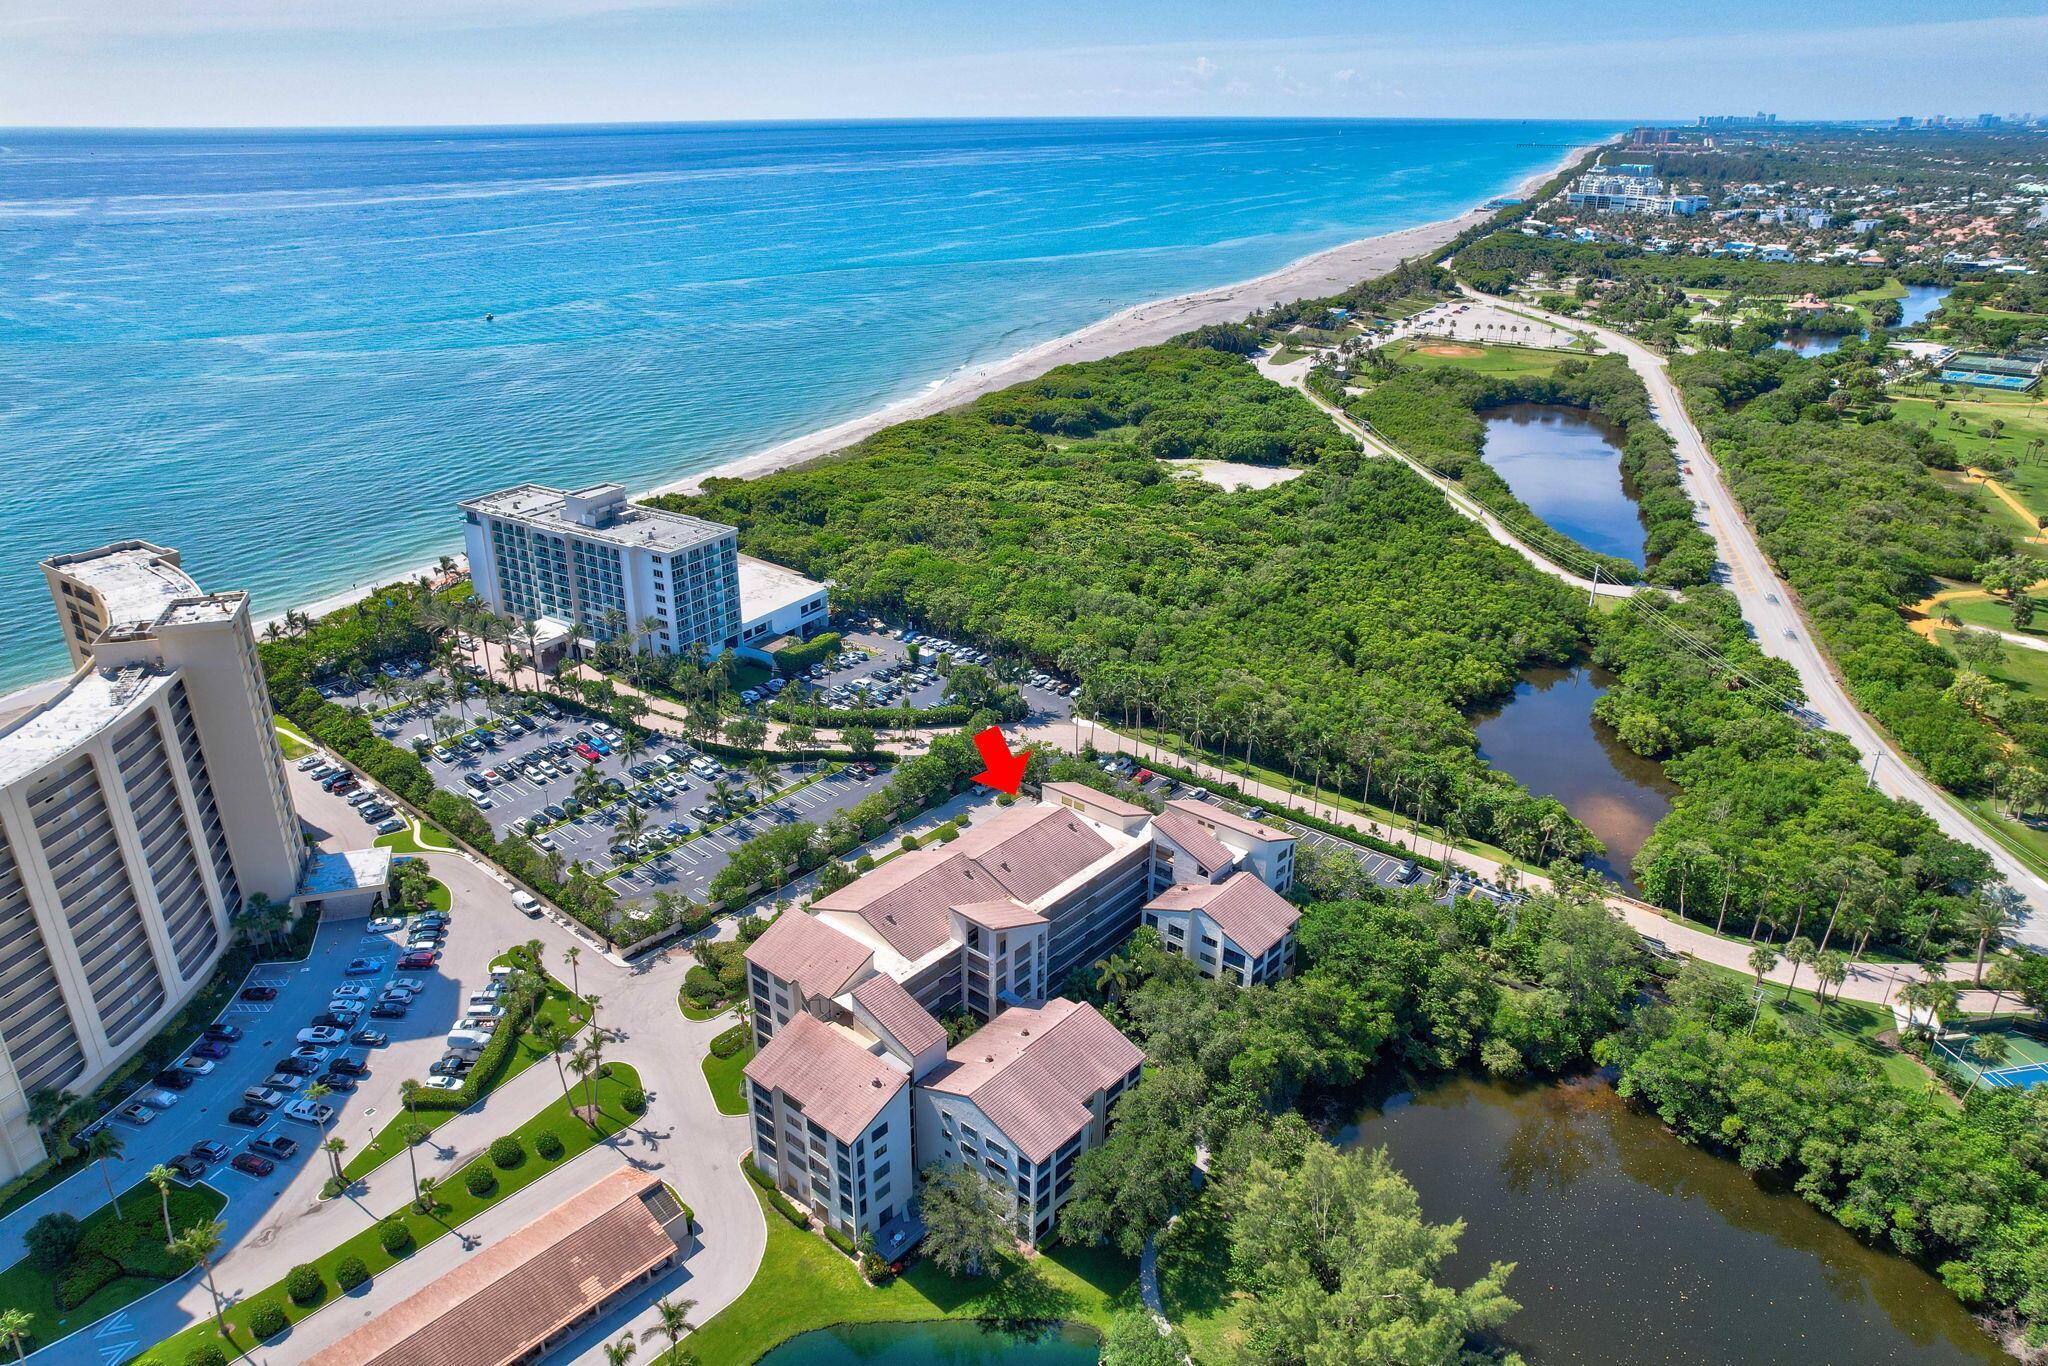 Priced to Sell! Enjoy Jupiter's Best Location & a Country Club Lifestyle on the Beach: Minutes walk or golf cart drive to pristine beaches, marinas, golf, Broadway Theater, Shopping, Fine and Casual Dining, Parks, Tennis/Pickle Ball, Spa, and more! Don't miss this opportunity to own and live in the highly sought-after Jupiter Inlet waterside community!! Walk to Jupiter Beach Resort or Guanabanas and more! Take immediate occupancy or start modern renovations before the 2025 Season!!